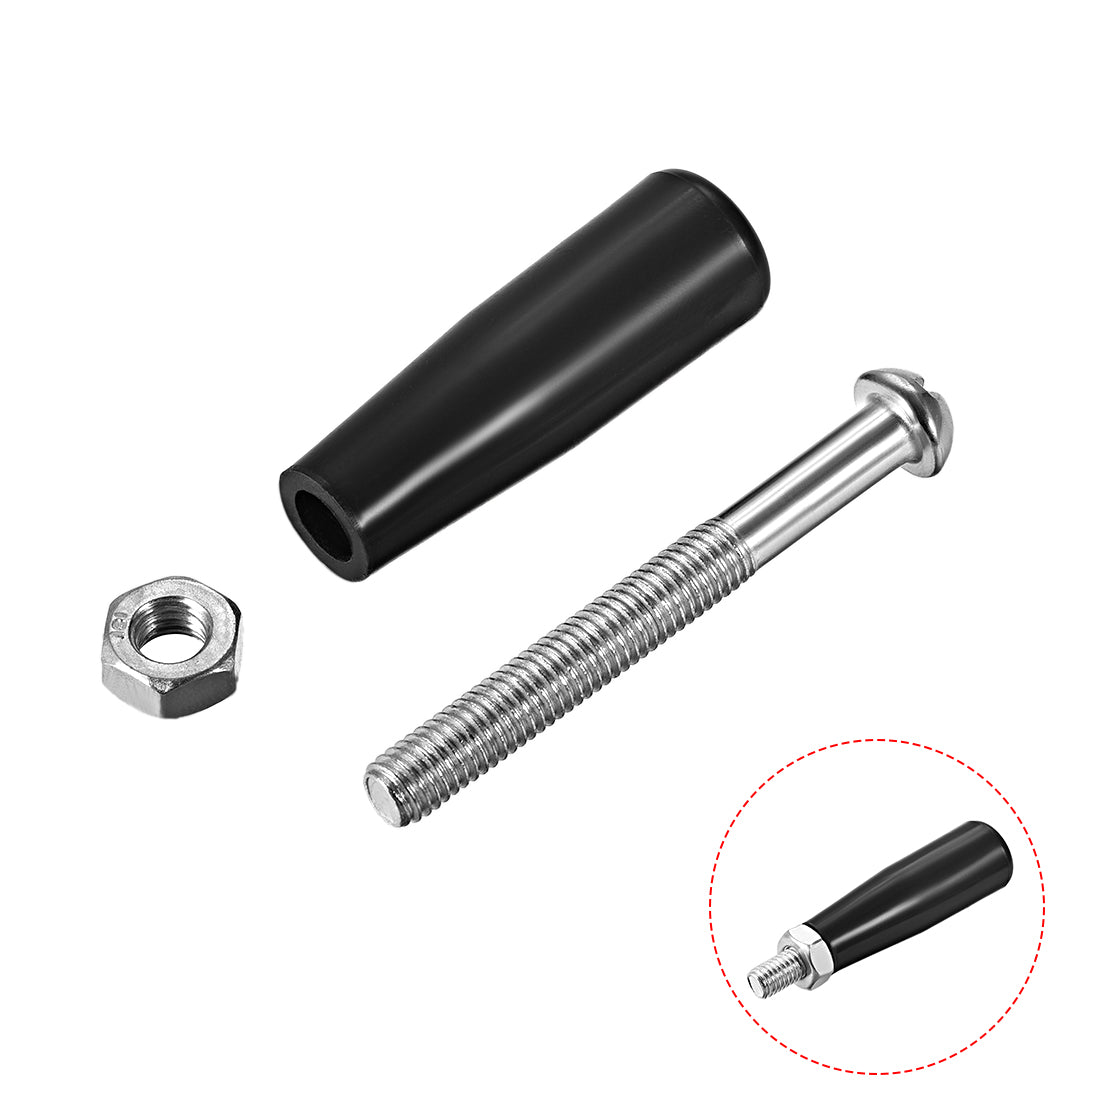 uxcell Uxcell Clamping Handles Screw Knobs M8 x 47mm (DxL)Threaded Plastic Metal Revolving Handle Grip 2pcs